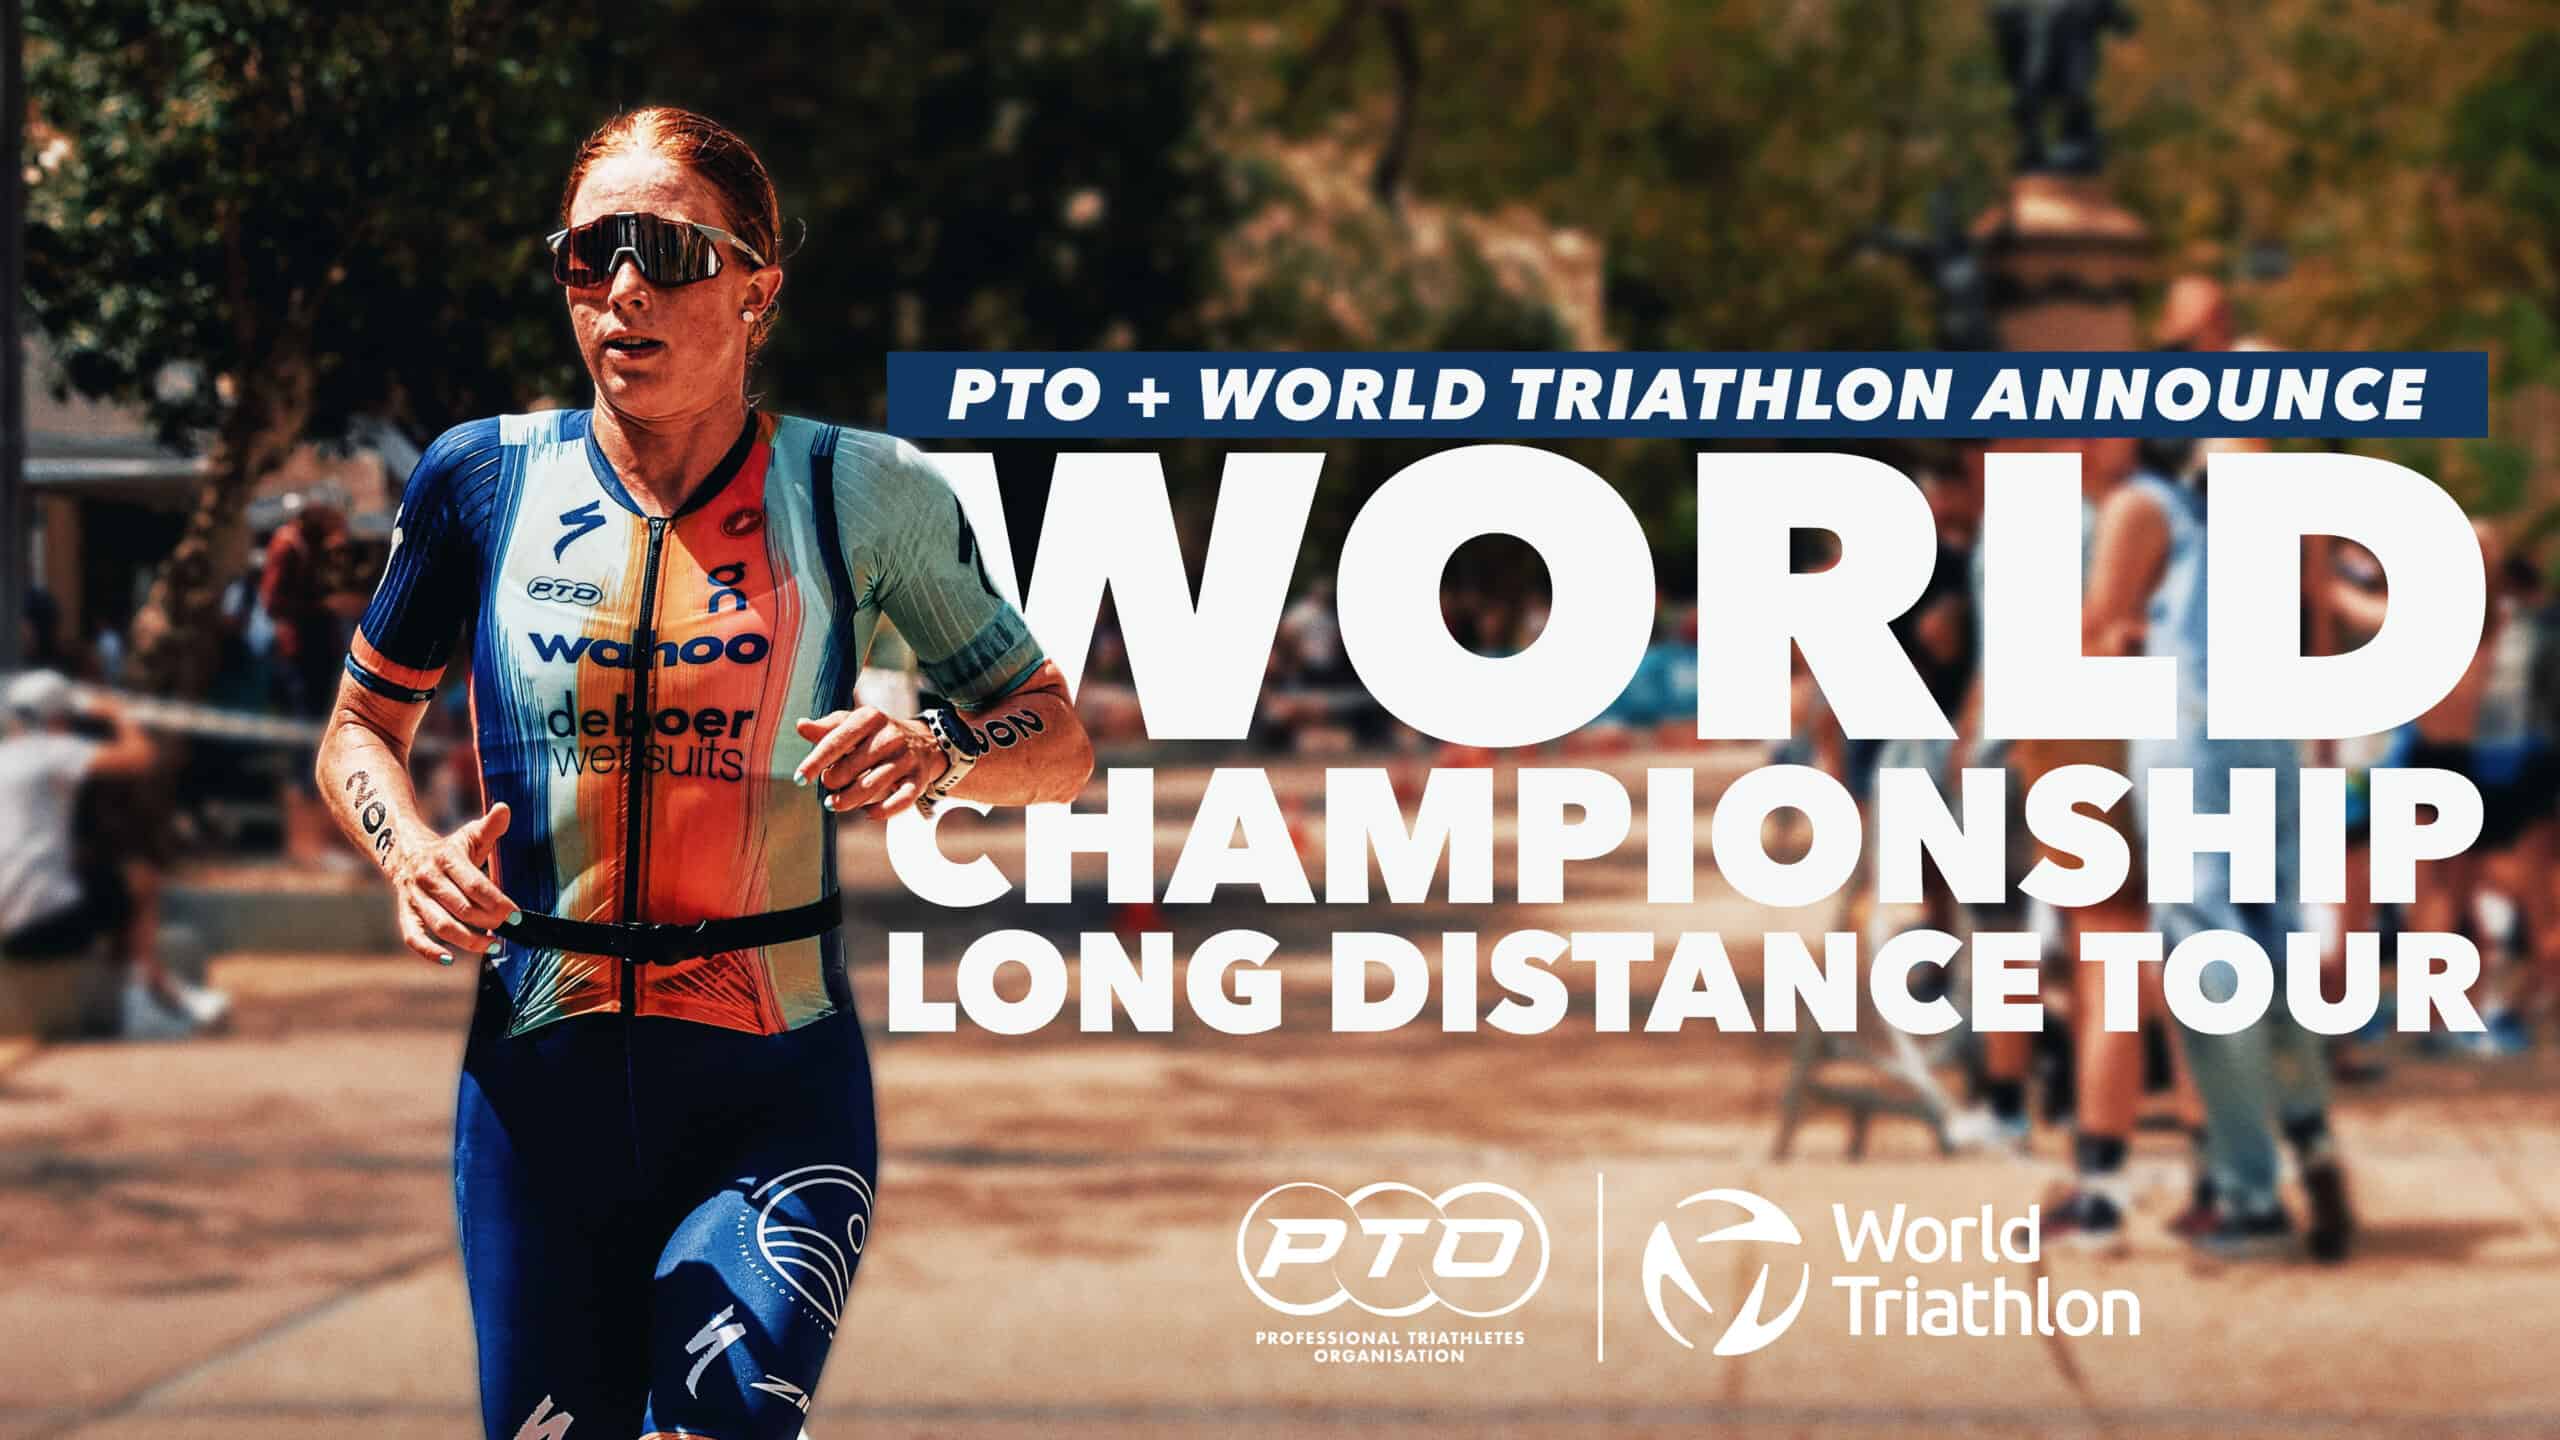 World Triathlon And PTO: PTO Tour Recognised As World Championship